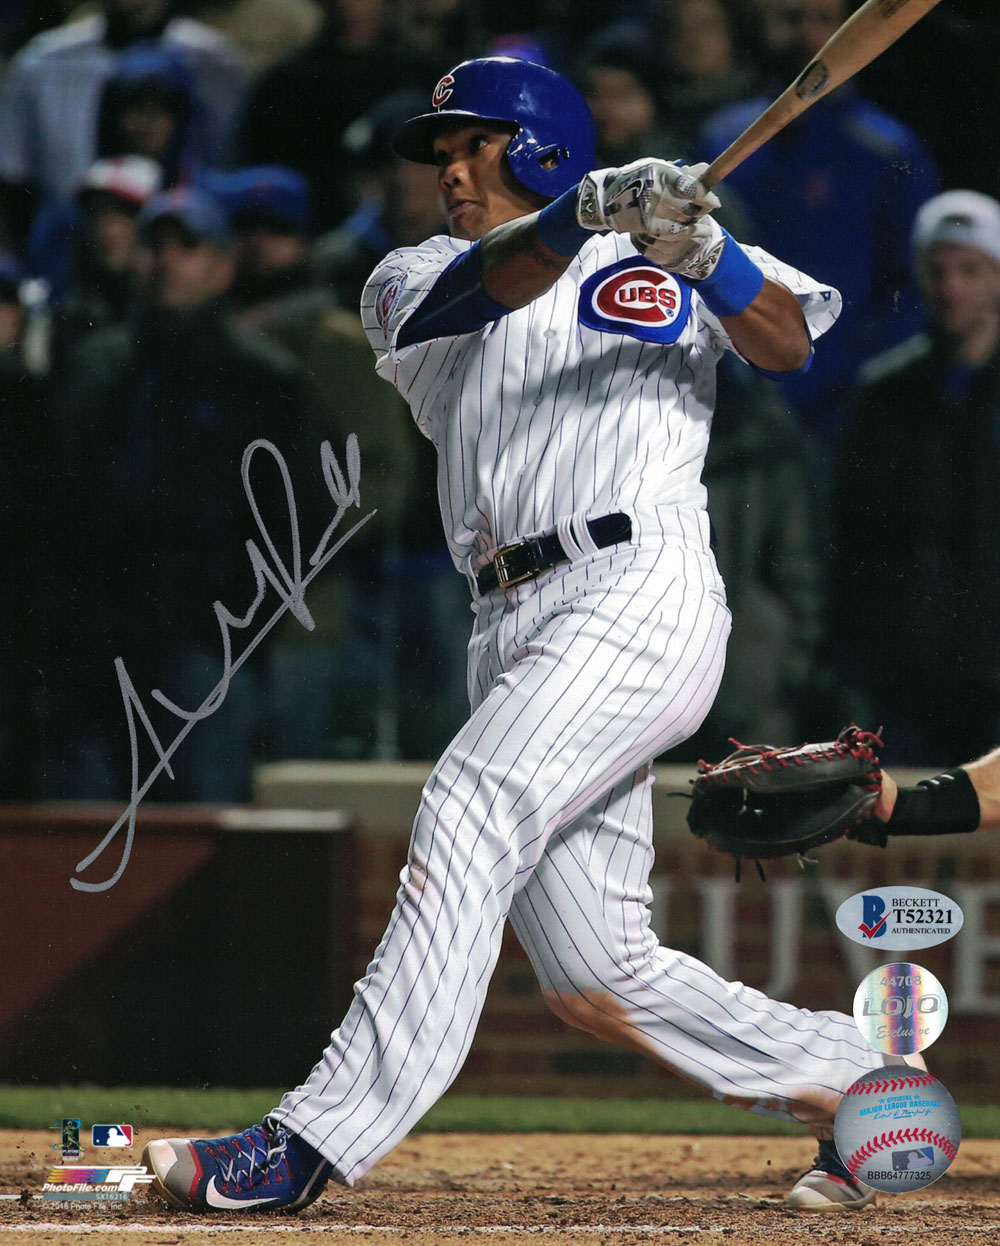 Addison Russell Autographed/Signed Chicago Cubs 8x10 Photo BAS 27300 PF